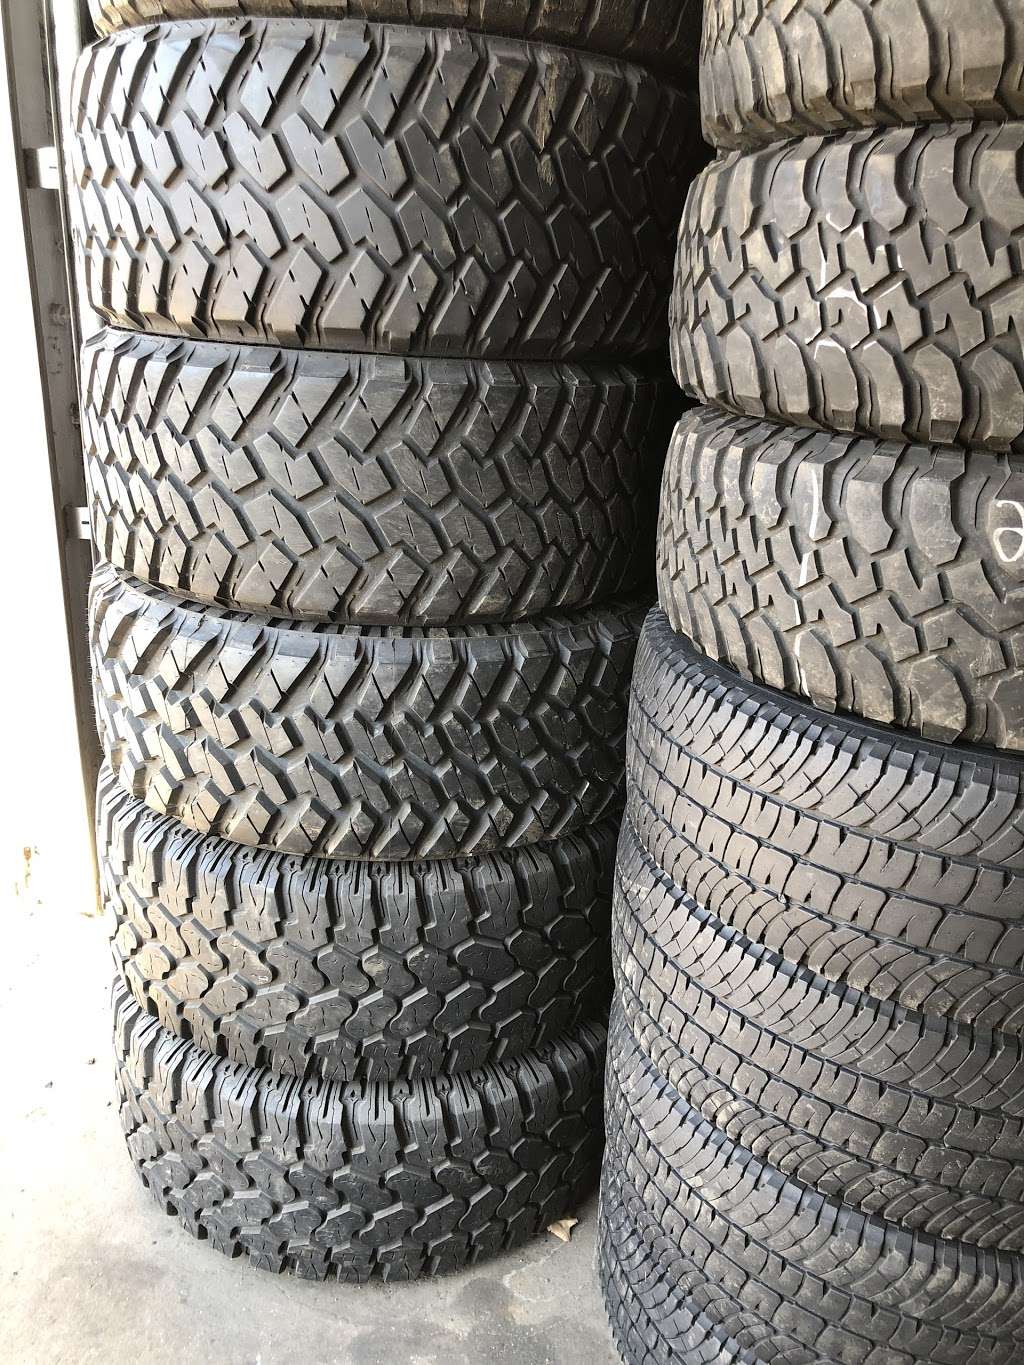 Brother tires 2 llc | 1564 Annapolis Rd, Odenton, MD 21113, USA | Phone: (443) 472-1985